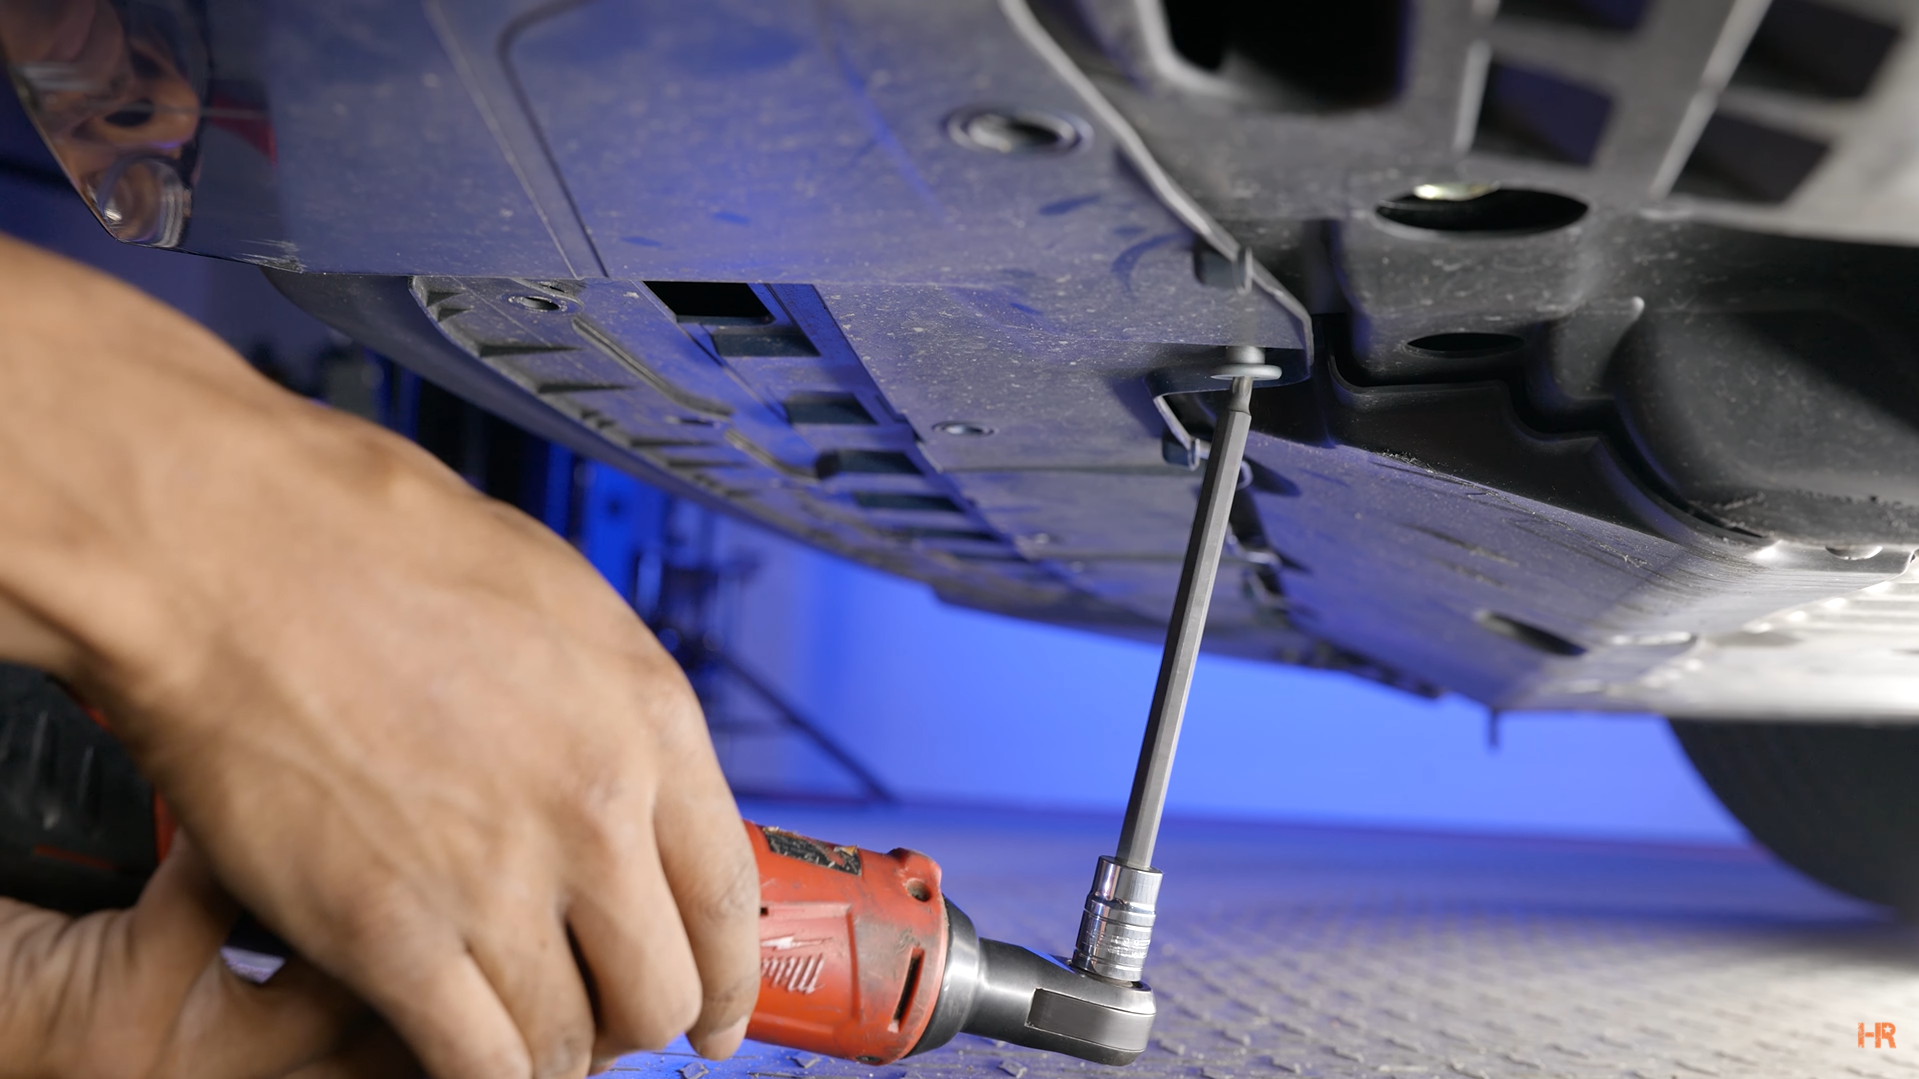 A man removes T10 screws from a Civic's base plate.